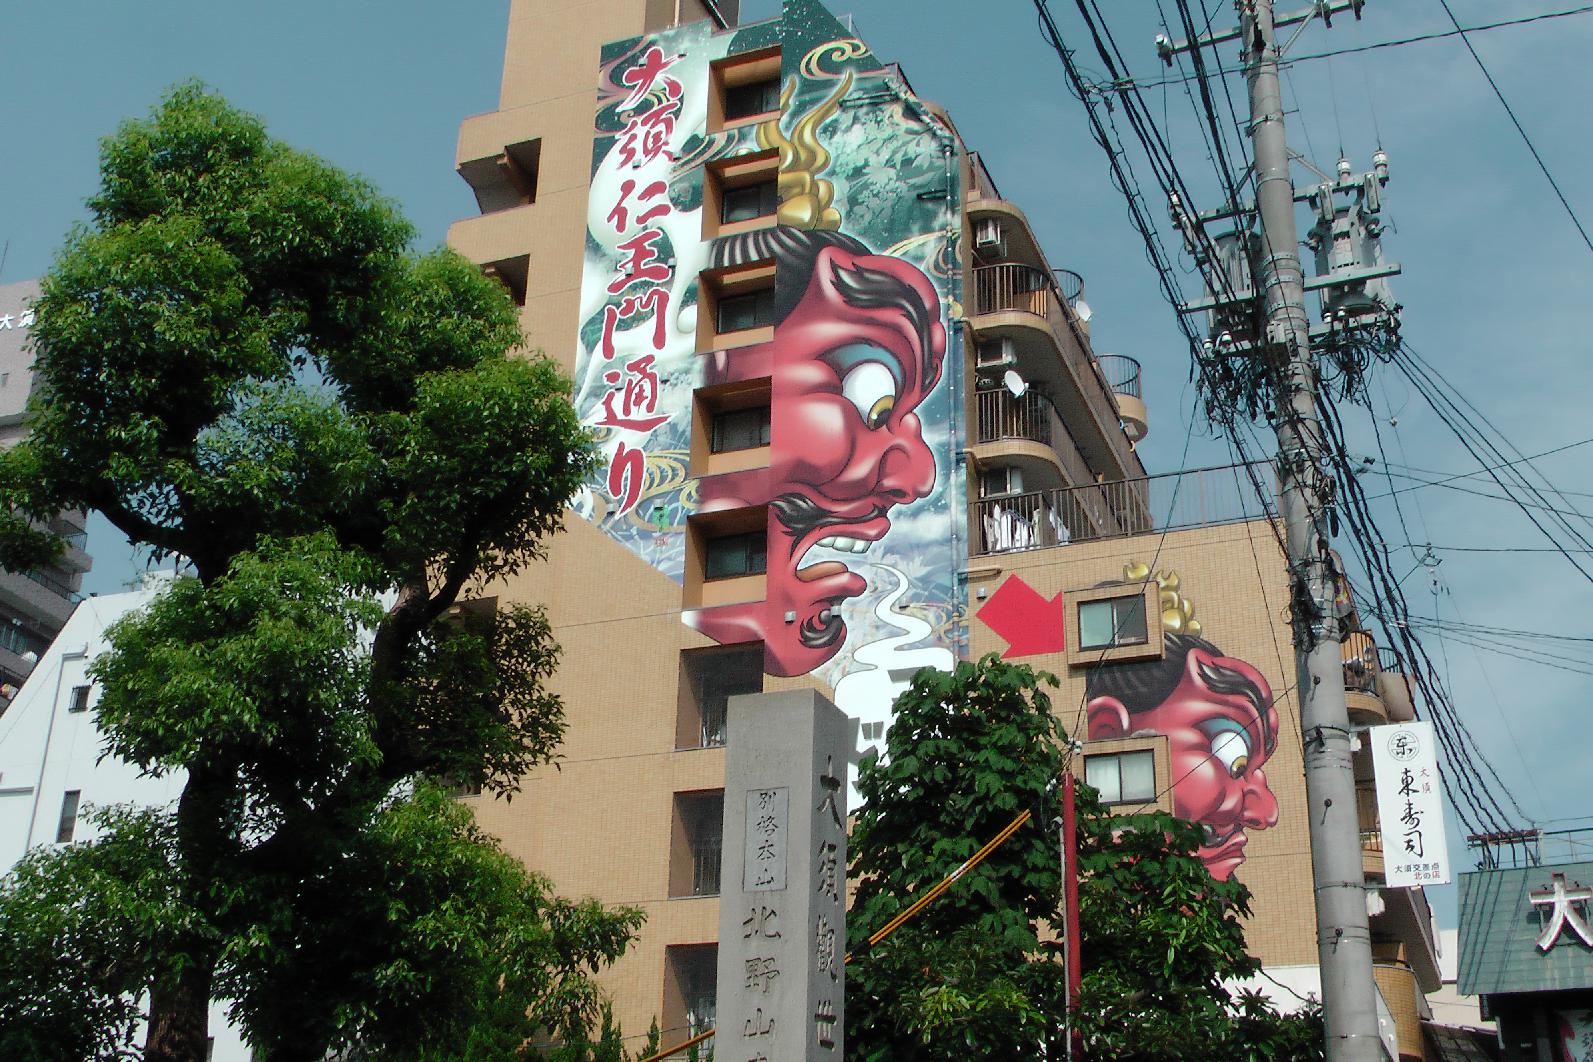 An oversized graffito points to the entrance